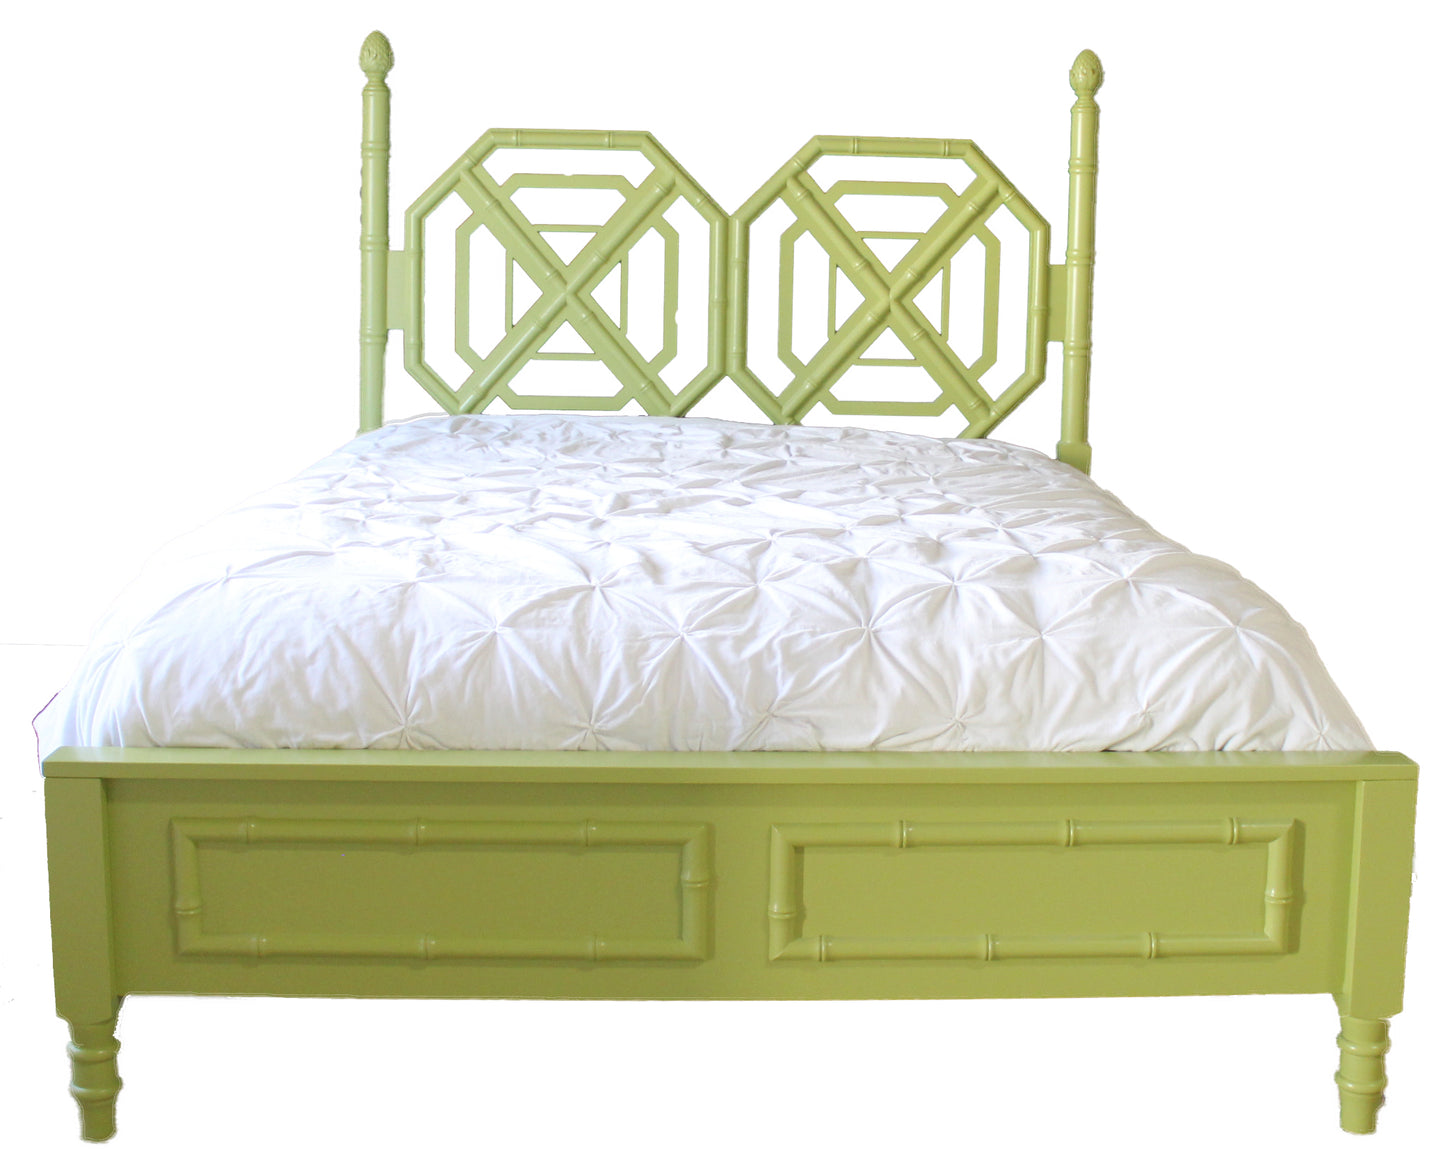 Jungle Road Twin Bed